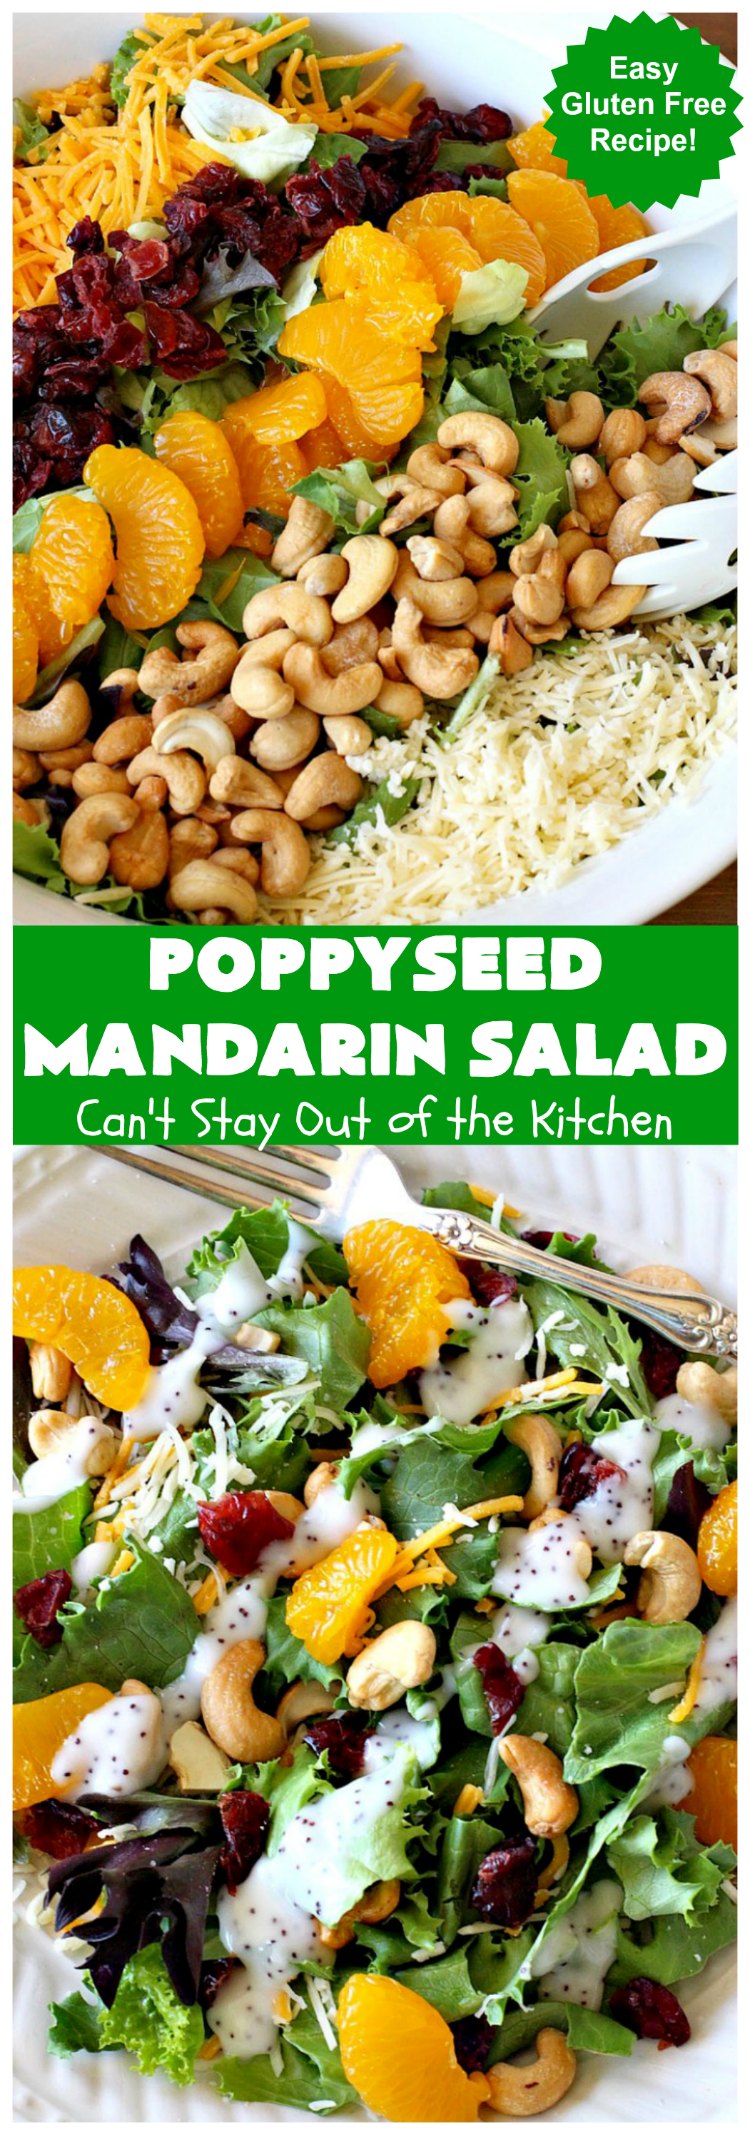 Poppyseed Mandarin Salad | Can't Stay Out of the Kitchen | this quick & easy #salad uses only 7 ingredients including the #SaladDressing. The contrasting savory & sweet flavors are delightful. Great for weeknight dinners. #GlutenFree #MandarinOranges #cashews #CheddarCheese #SwissCheese #cranberries #PoppyseedMandarinSalad